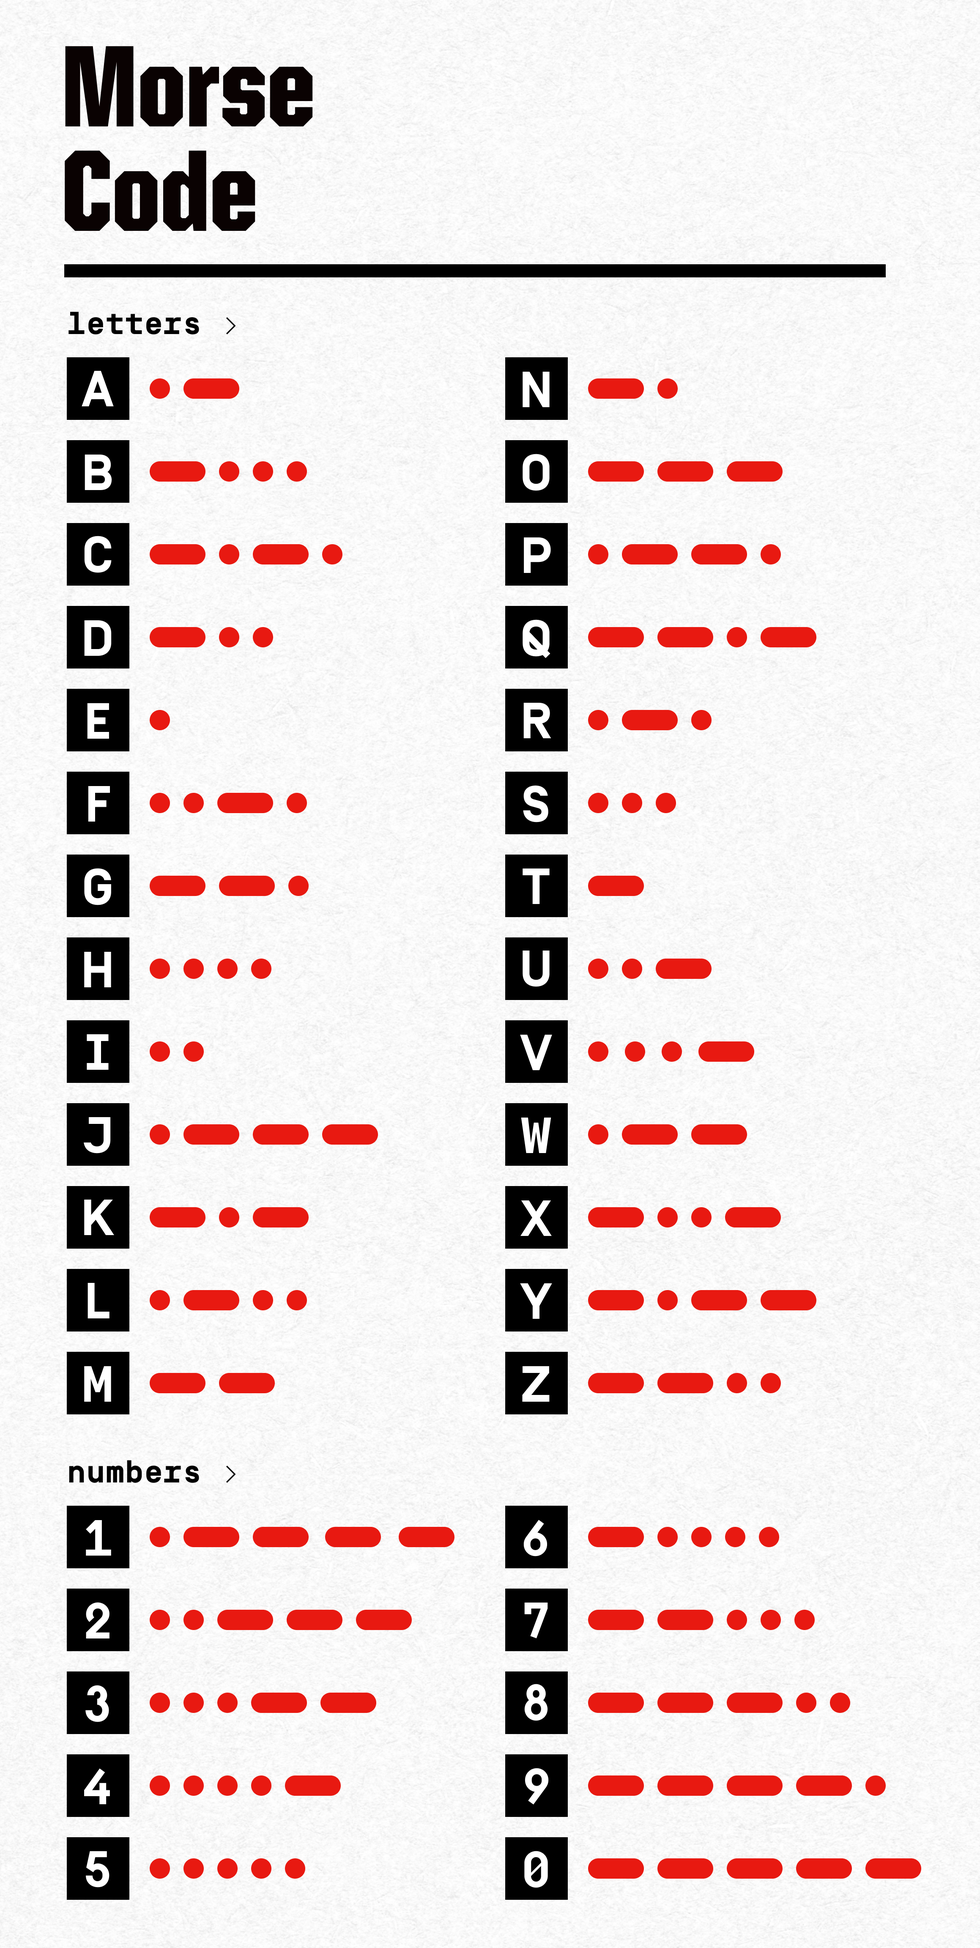 morse code letters numbers